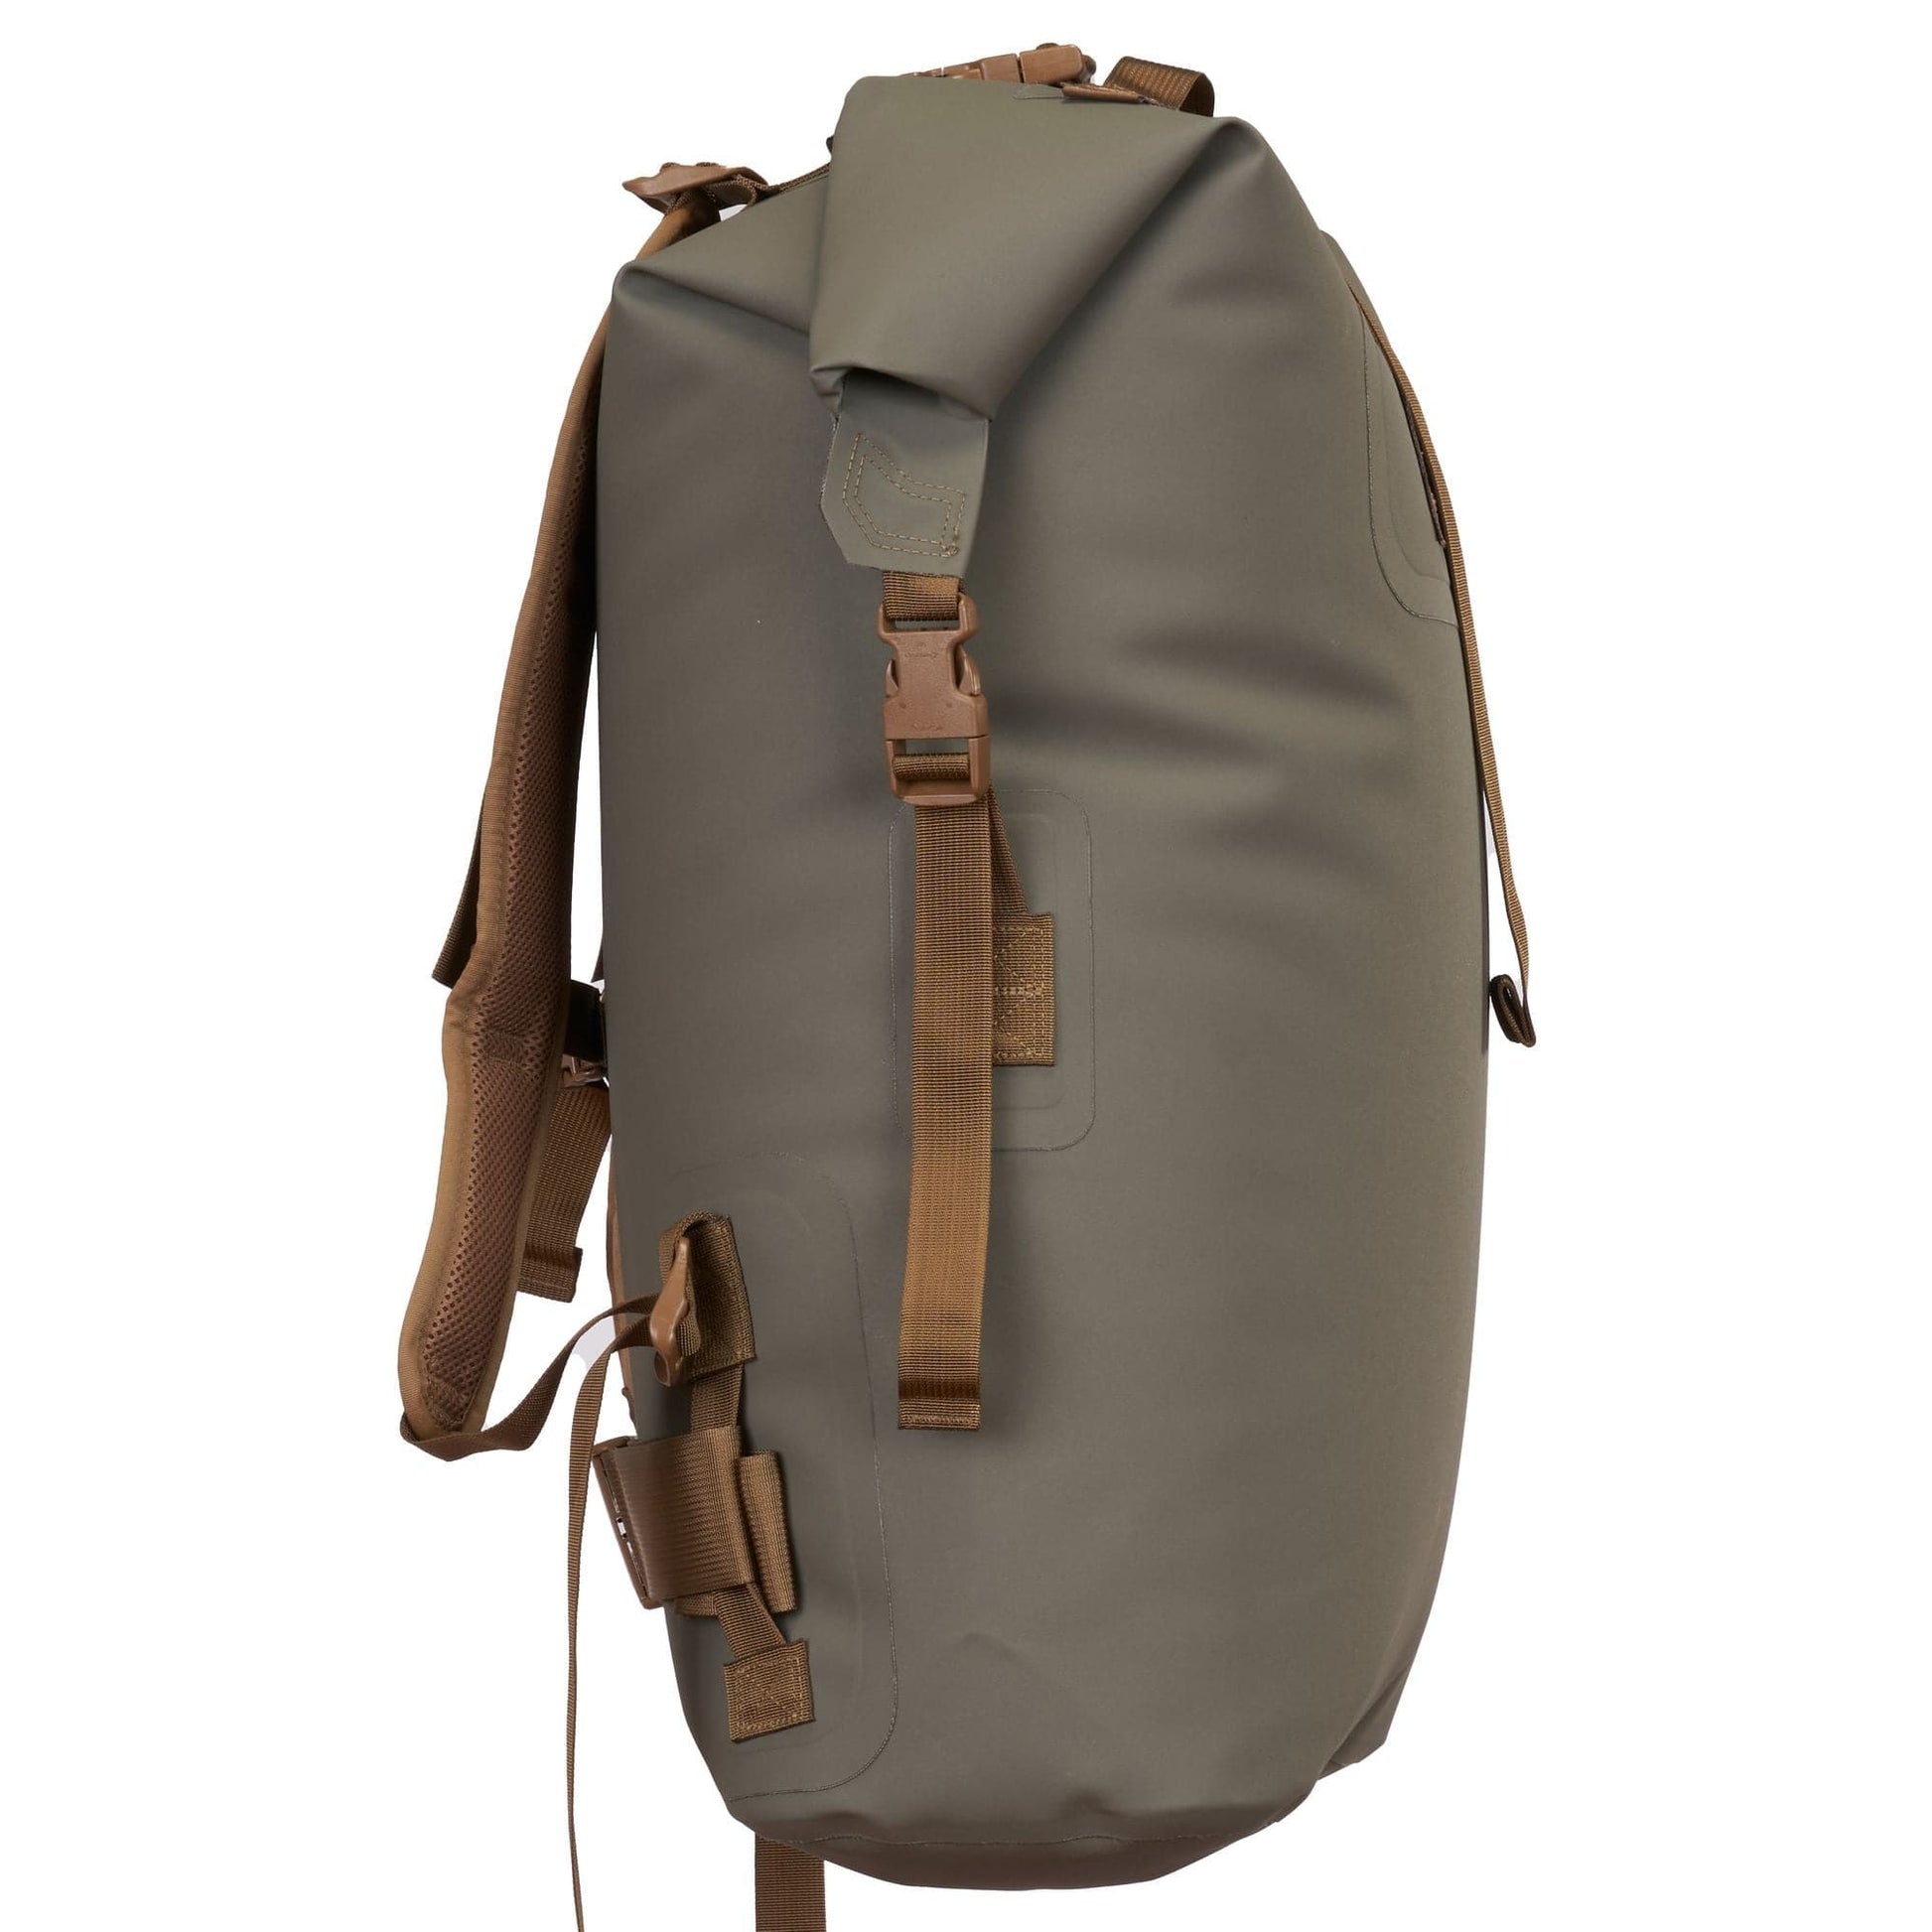 Featuring the Animas Drypack dry bag manufactured by Watershed shown here from a third angle.